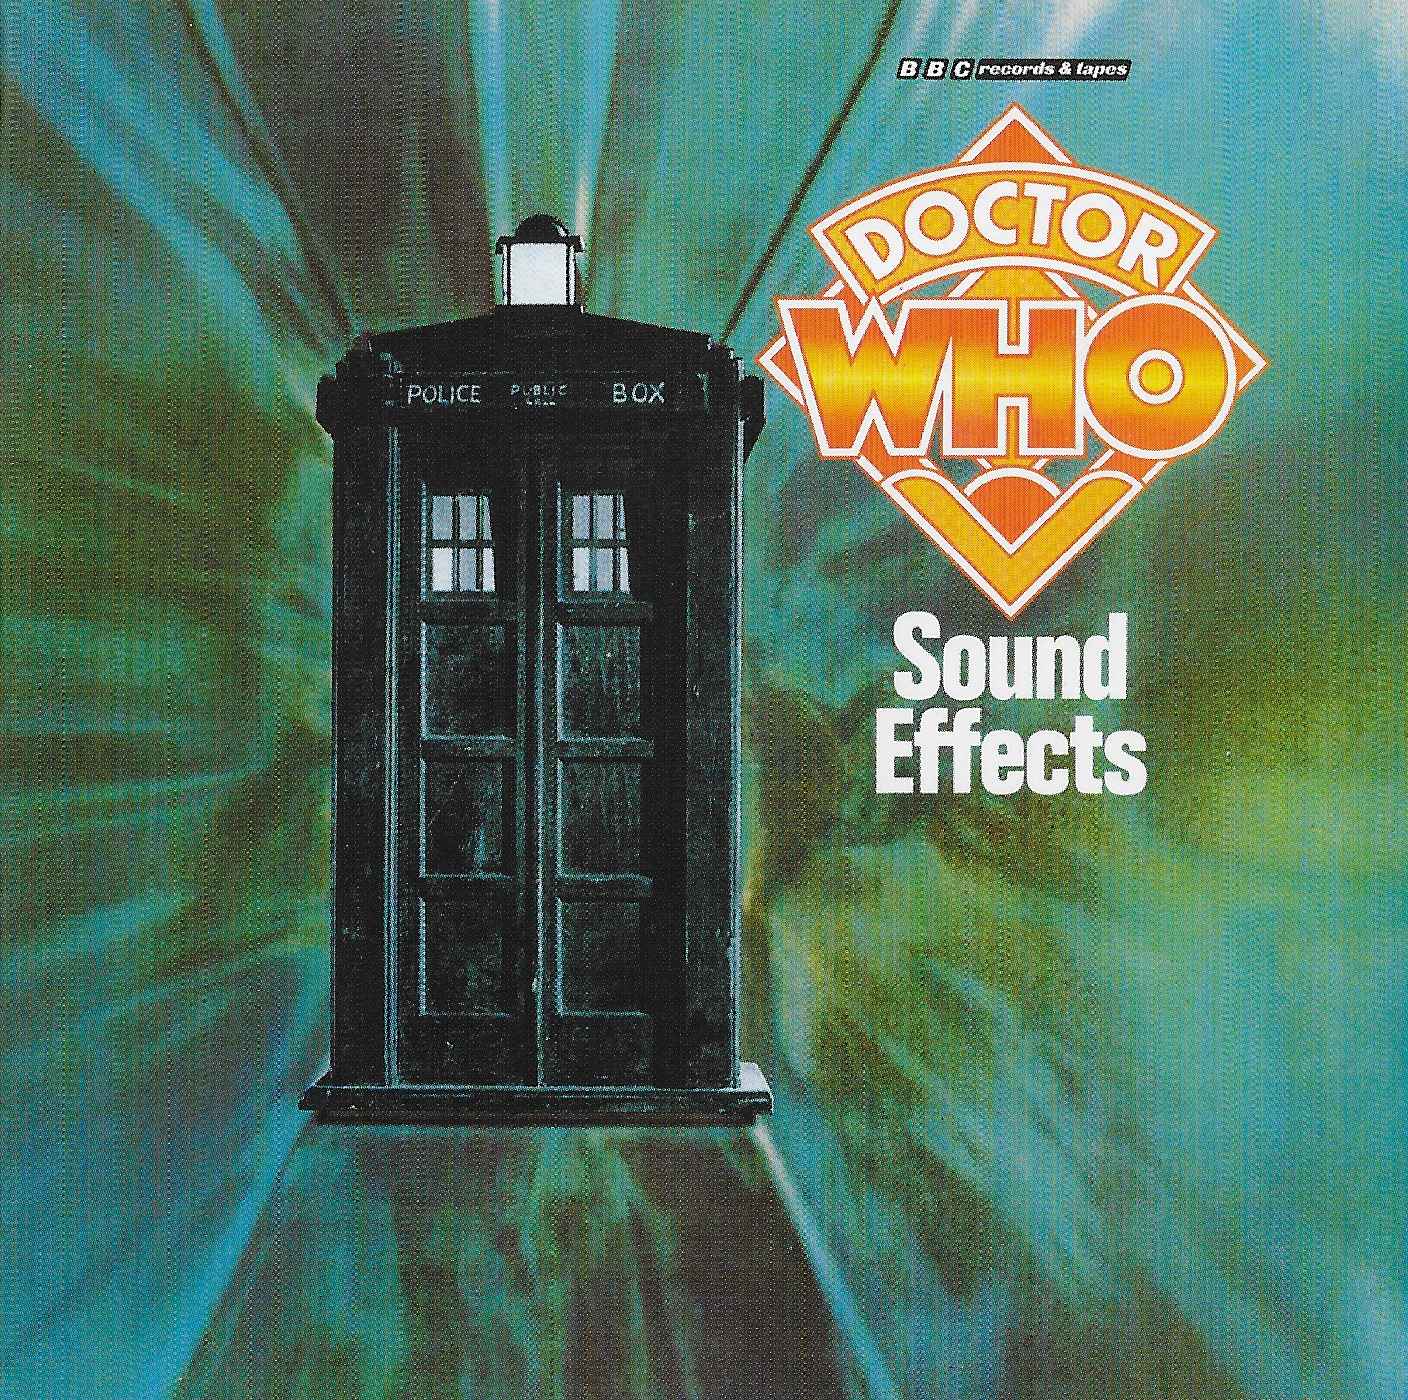 Picture of Doctor Who sound effects by artist BBC radiophonic workshop from the BBC cds - Records and Tapes library